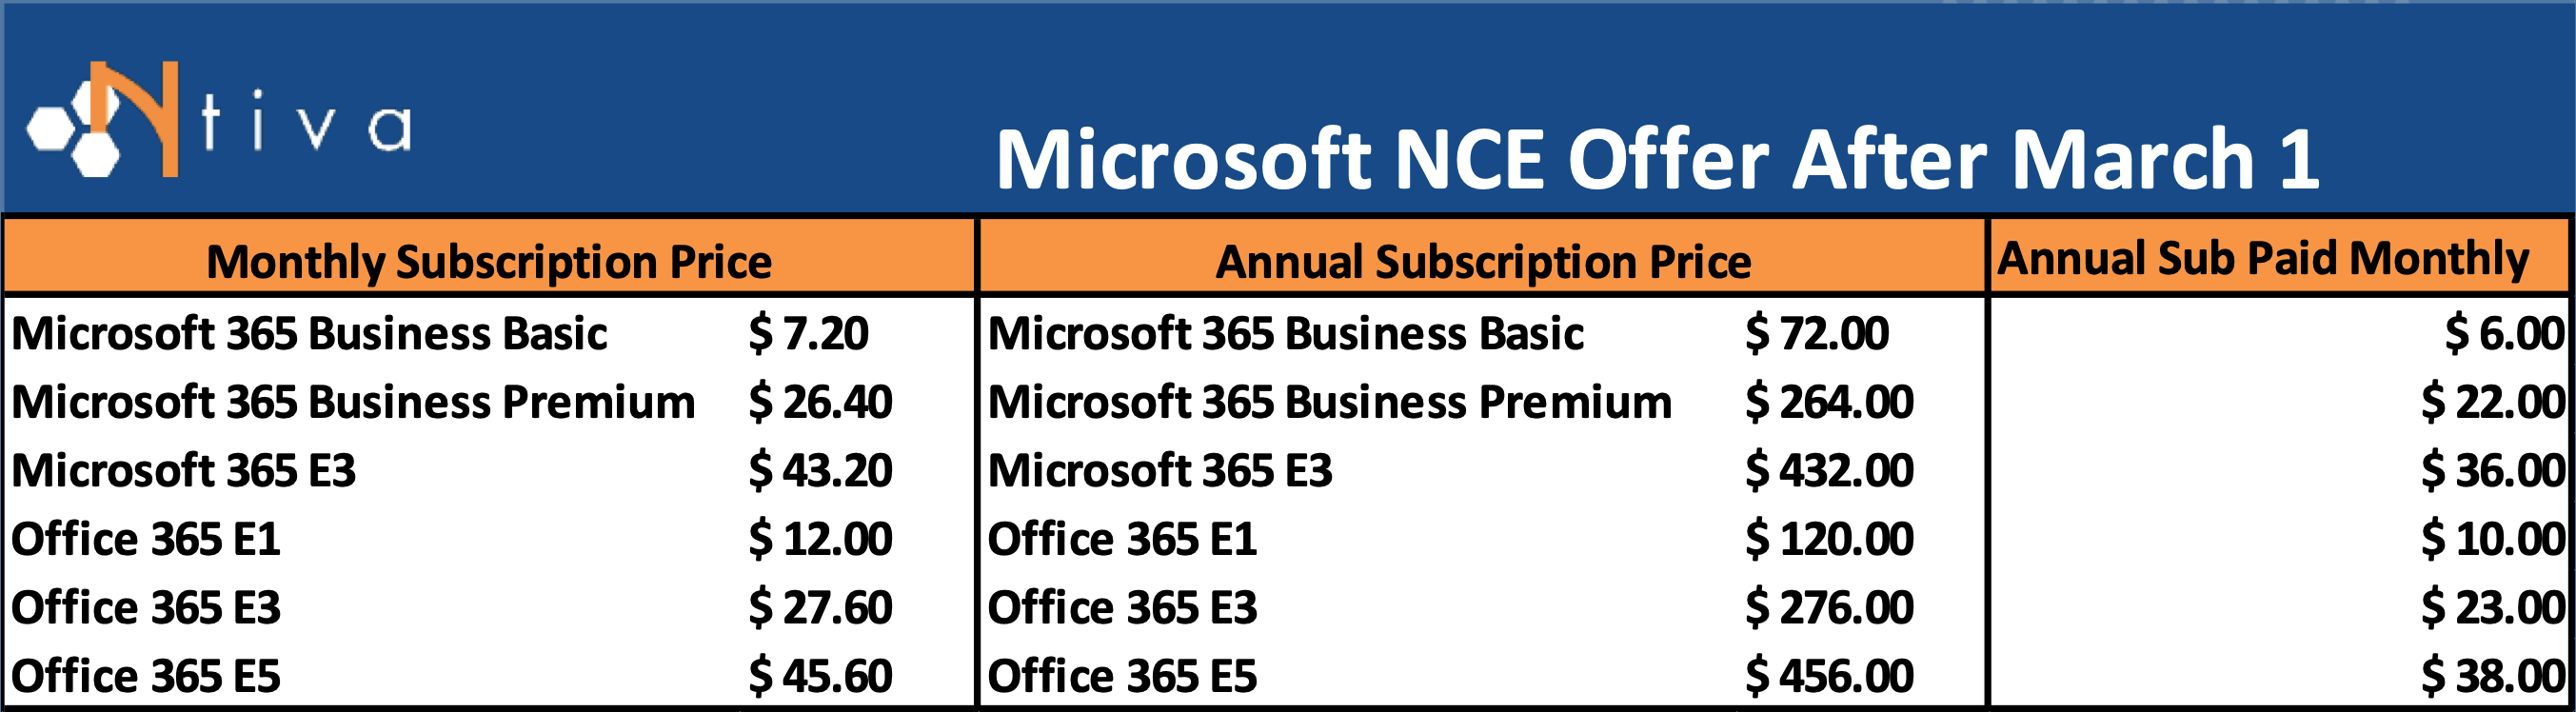 Ntiva Microsoft NCE Offer After March 2022